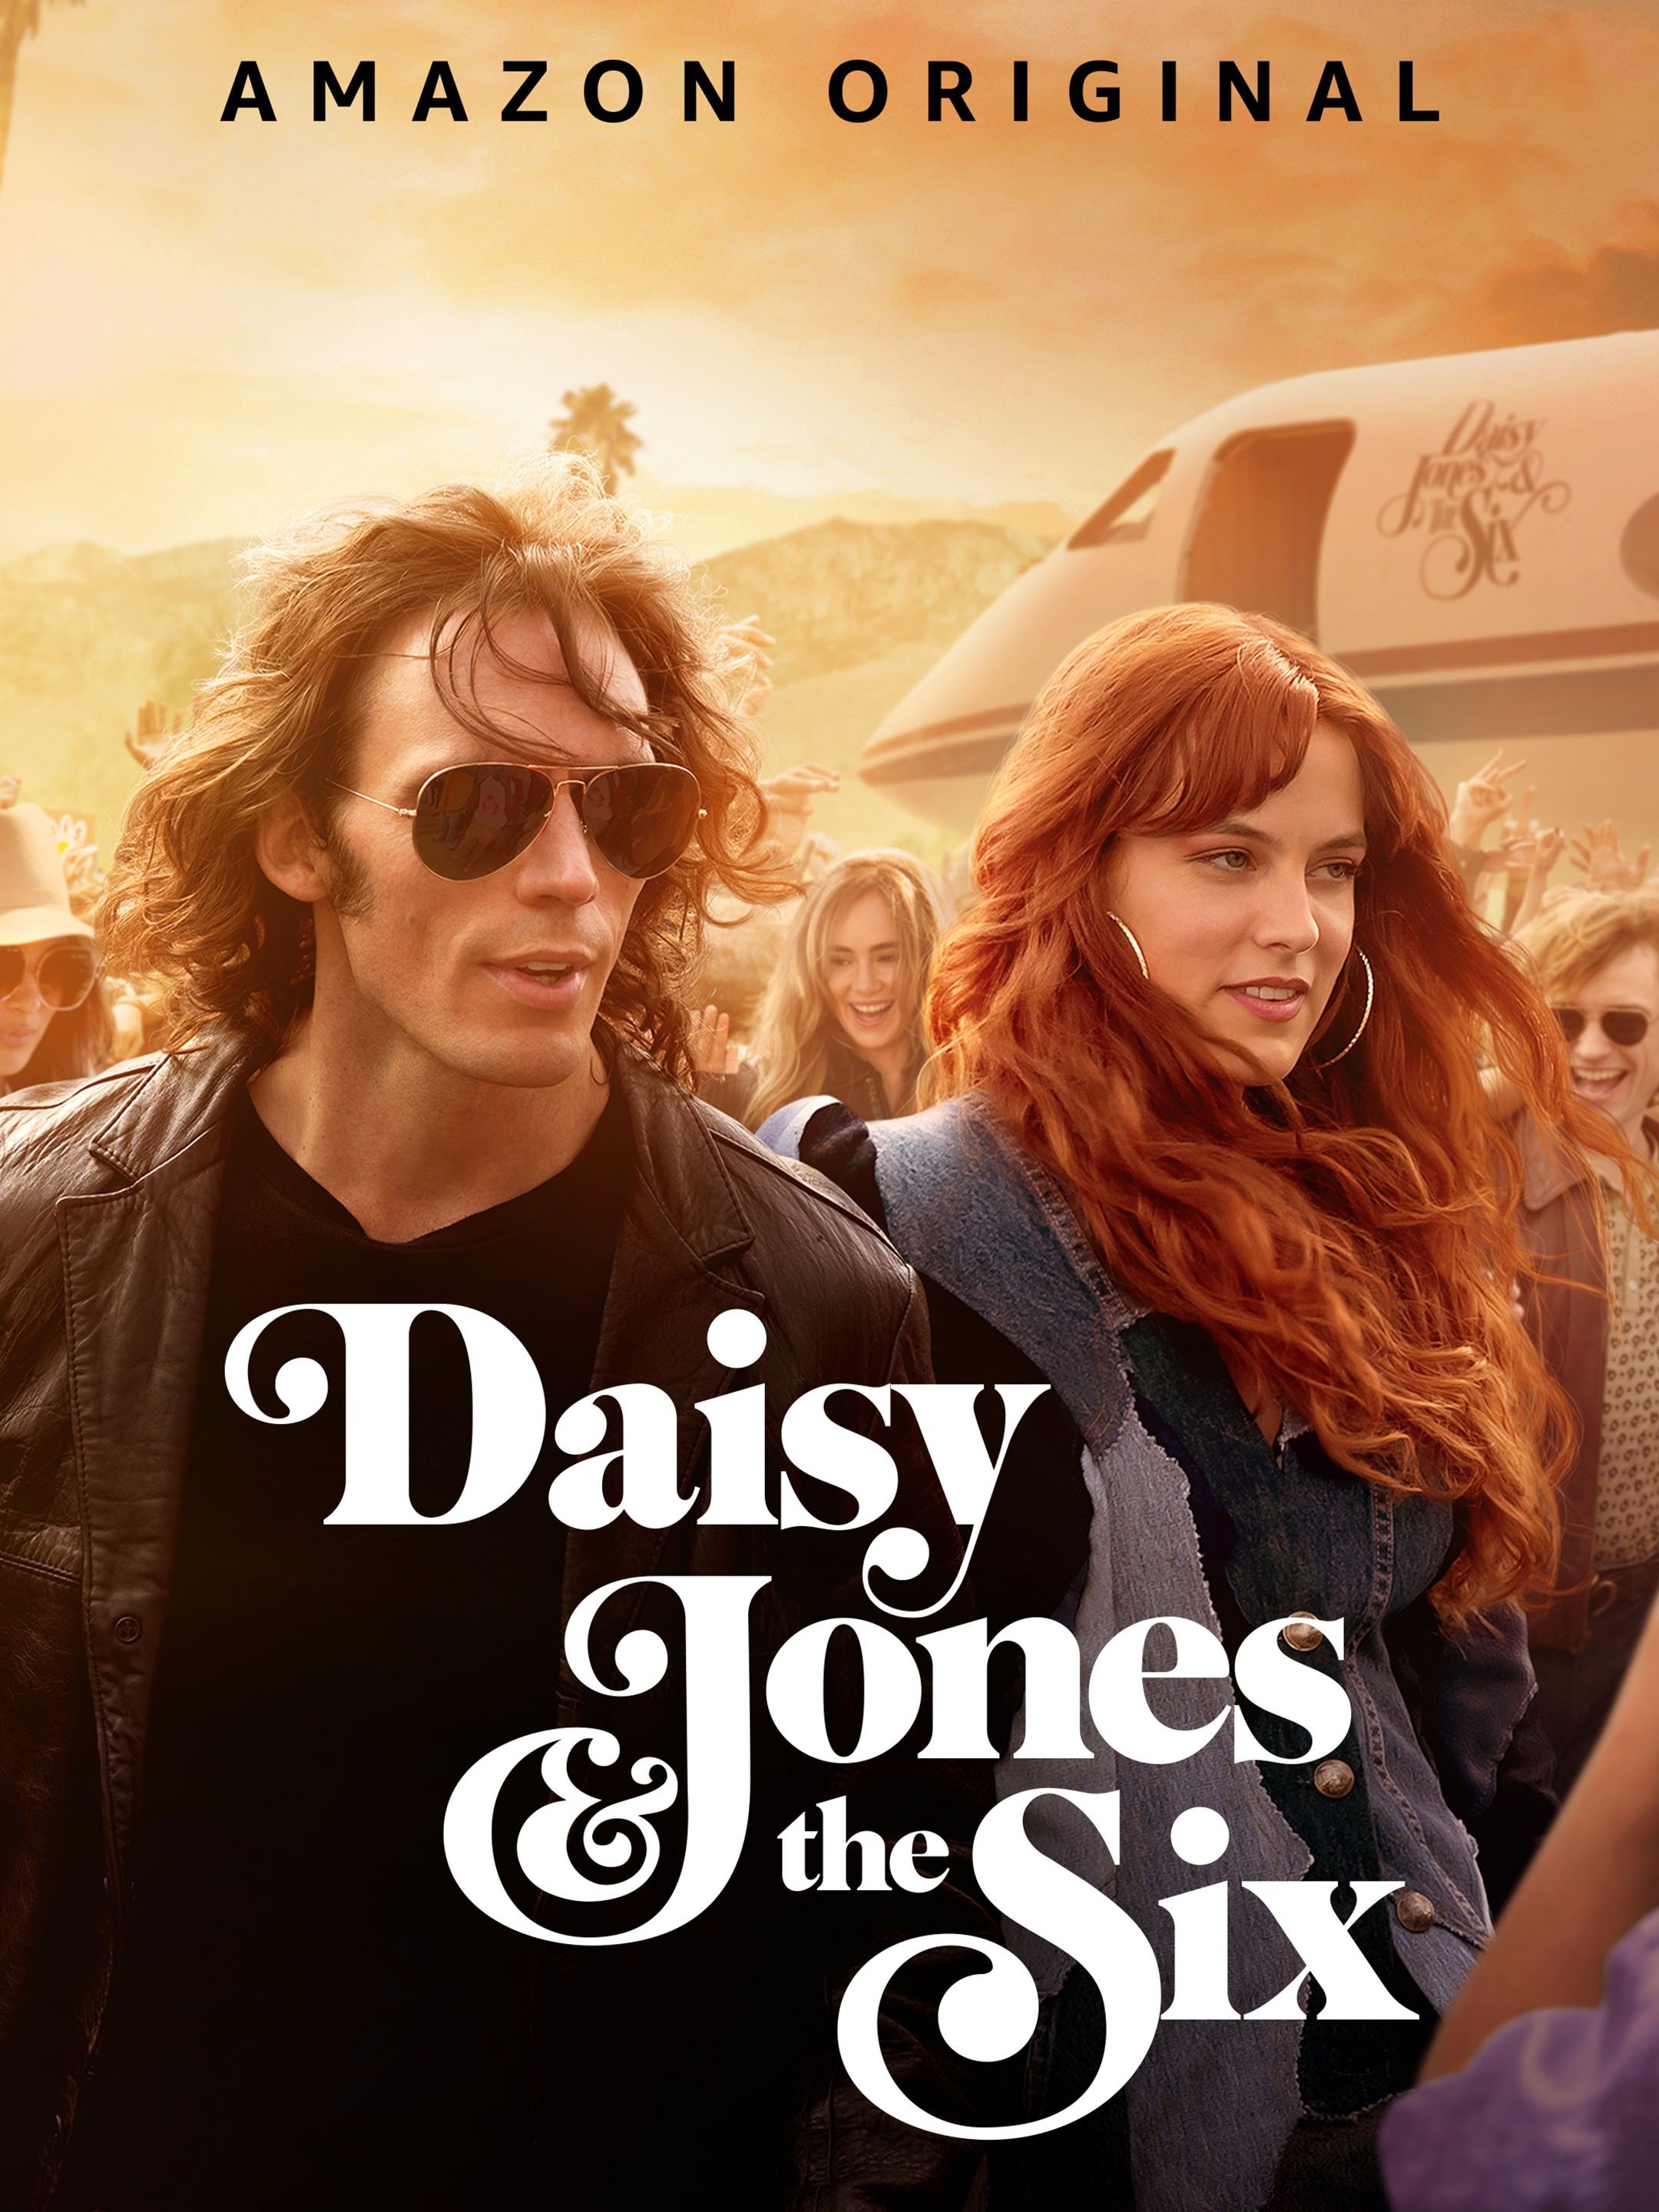 The Biggest Changes Daisy Jones & the Six Made to the Book